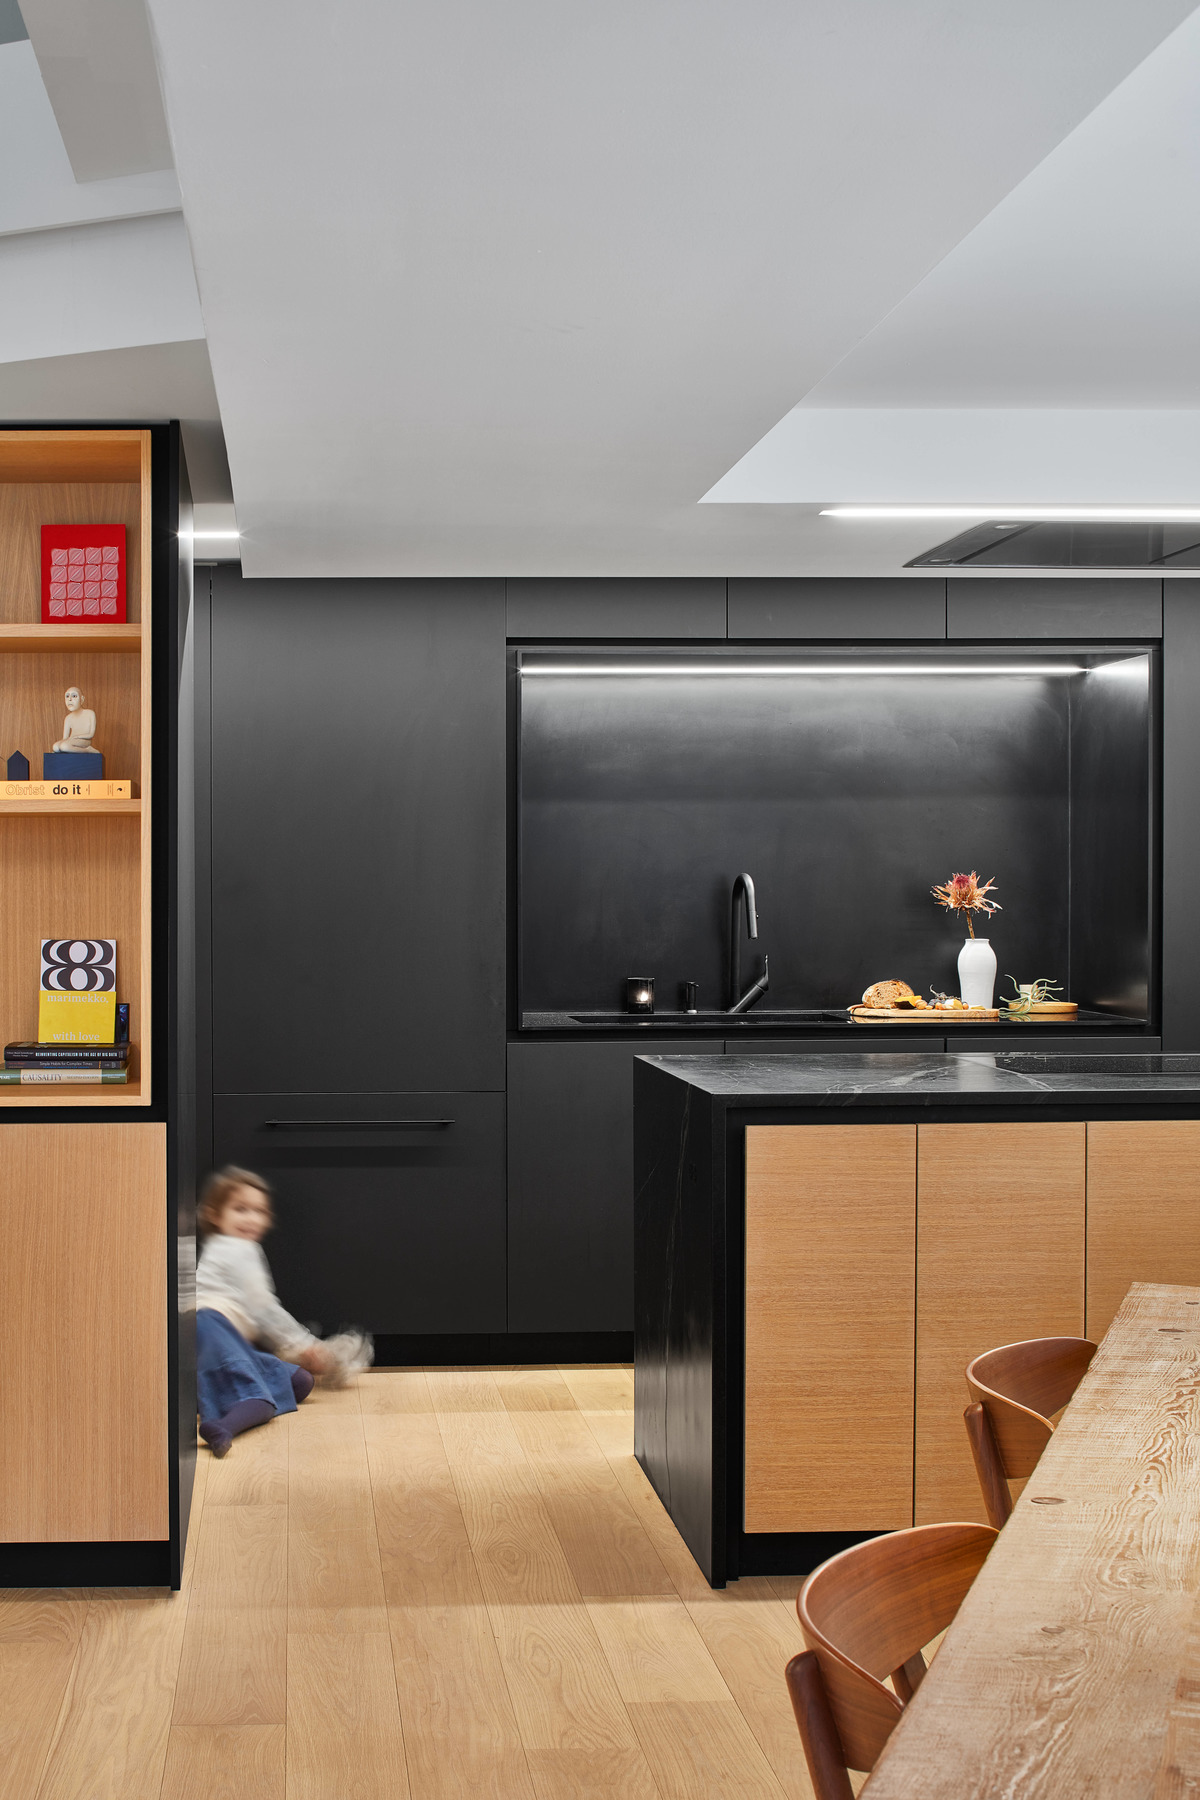 A modern matte black kitchen with hardware free cabinets and a large island with wood accents.